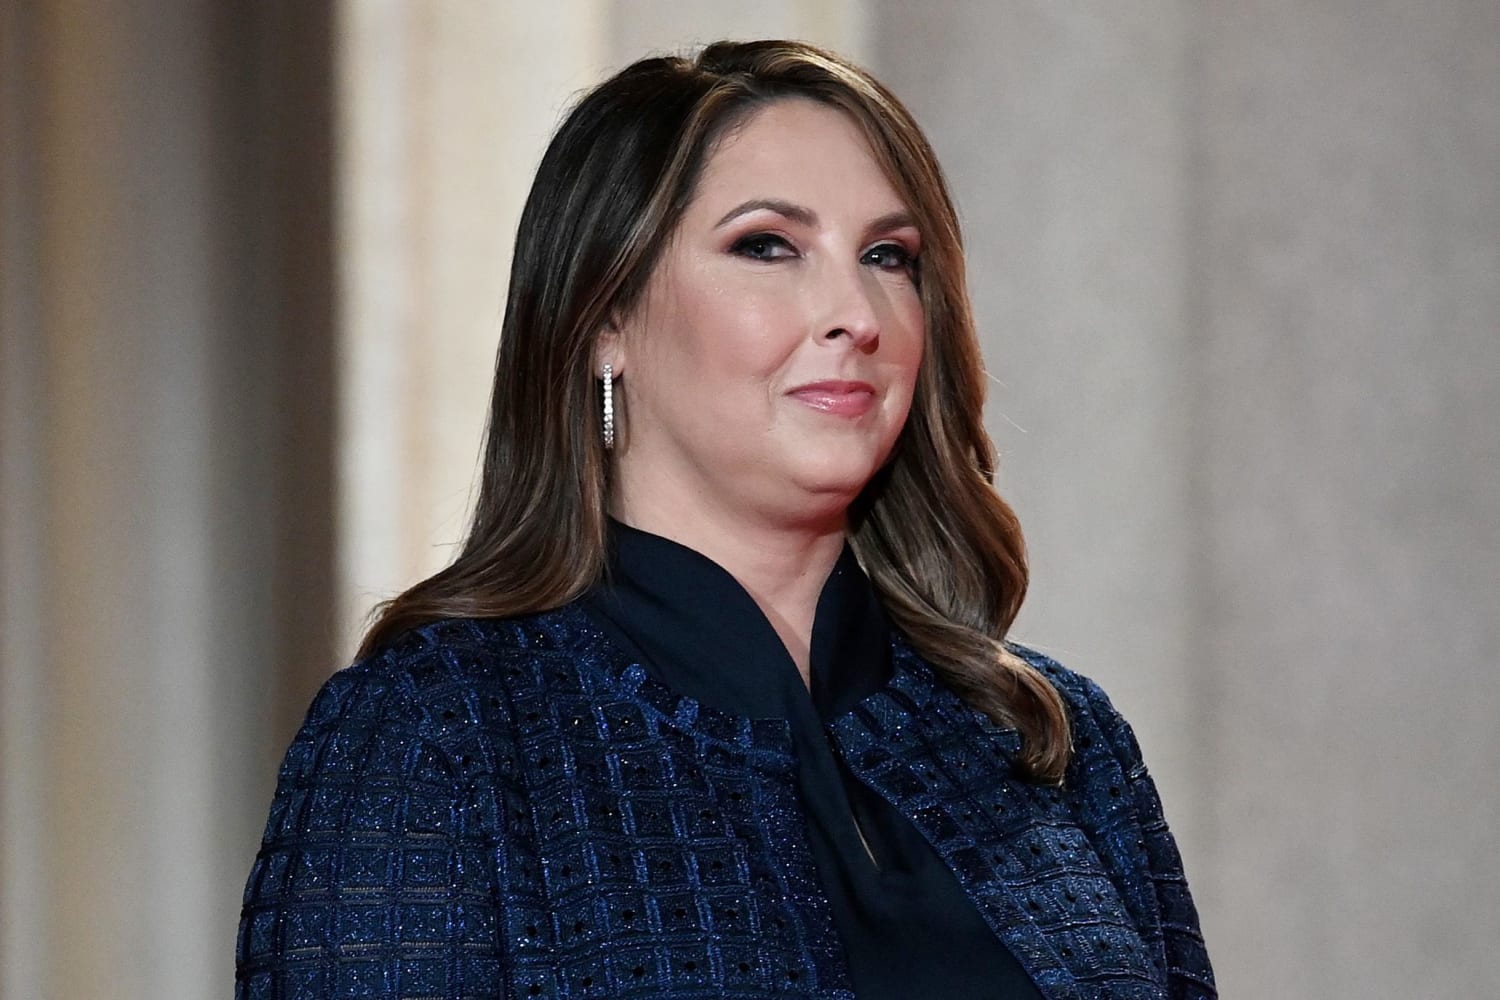 Ronna McDaniel wins re-election to fourth term as RNC chair